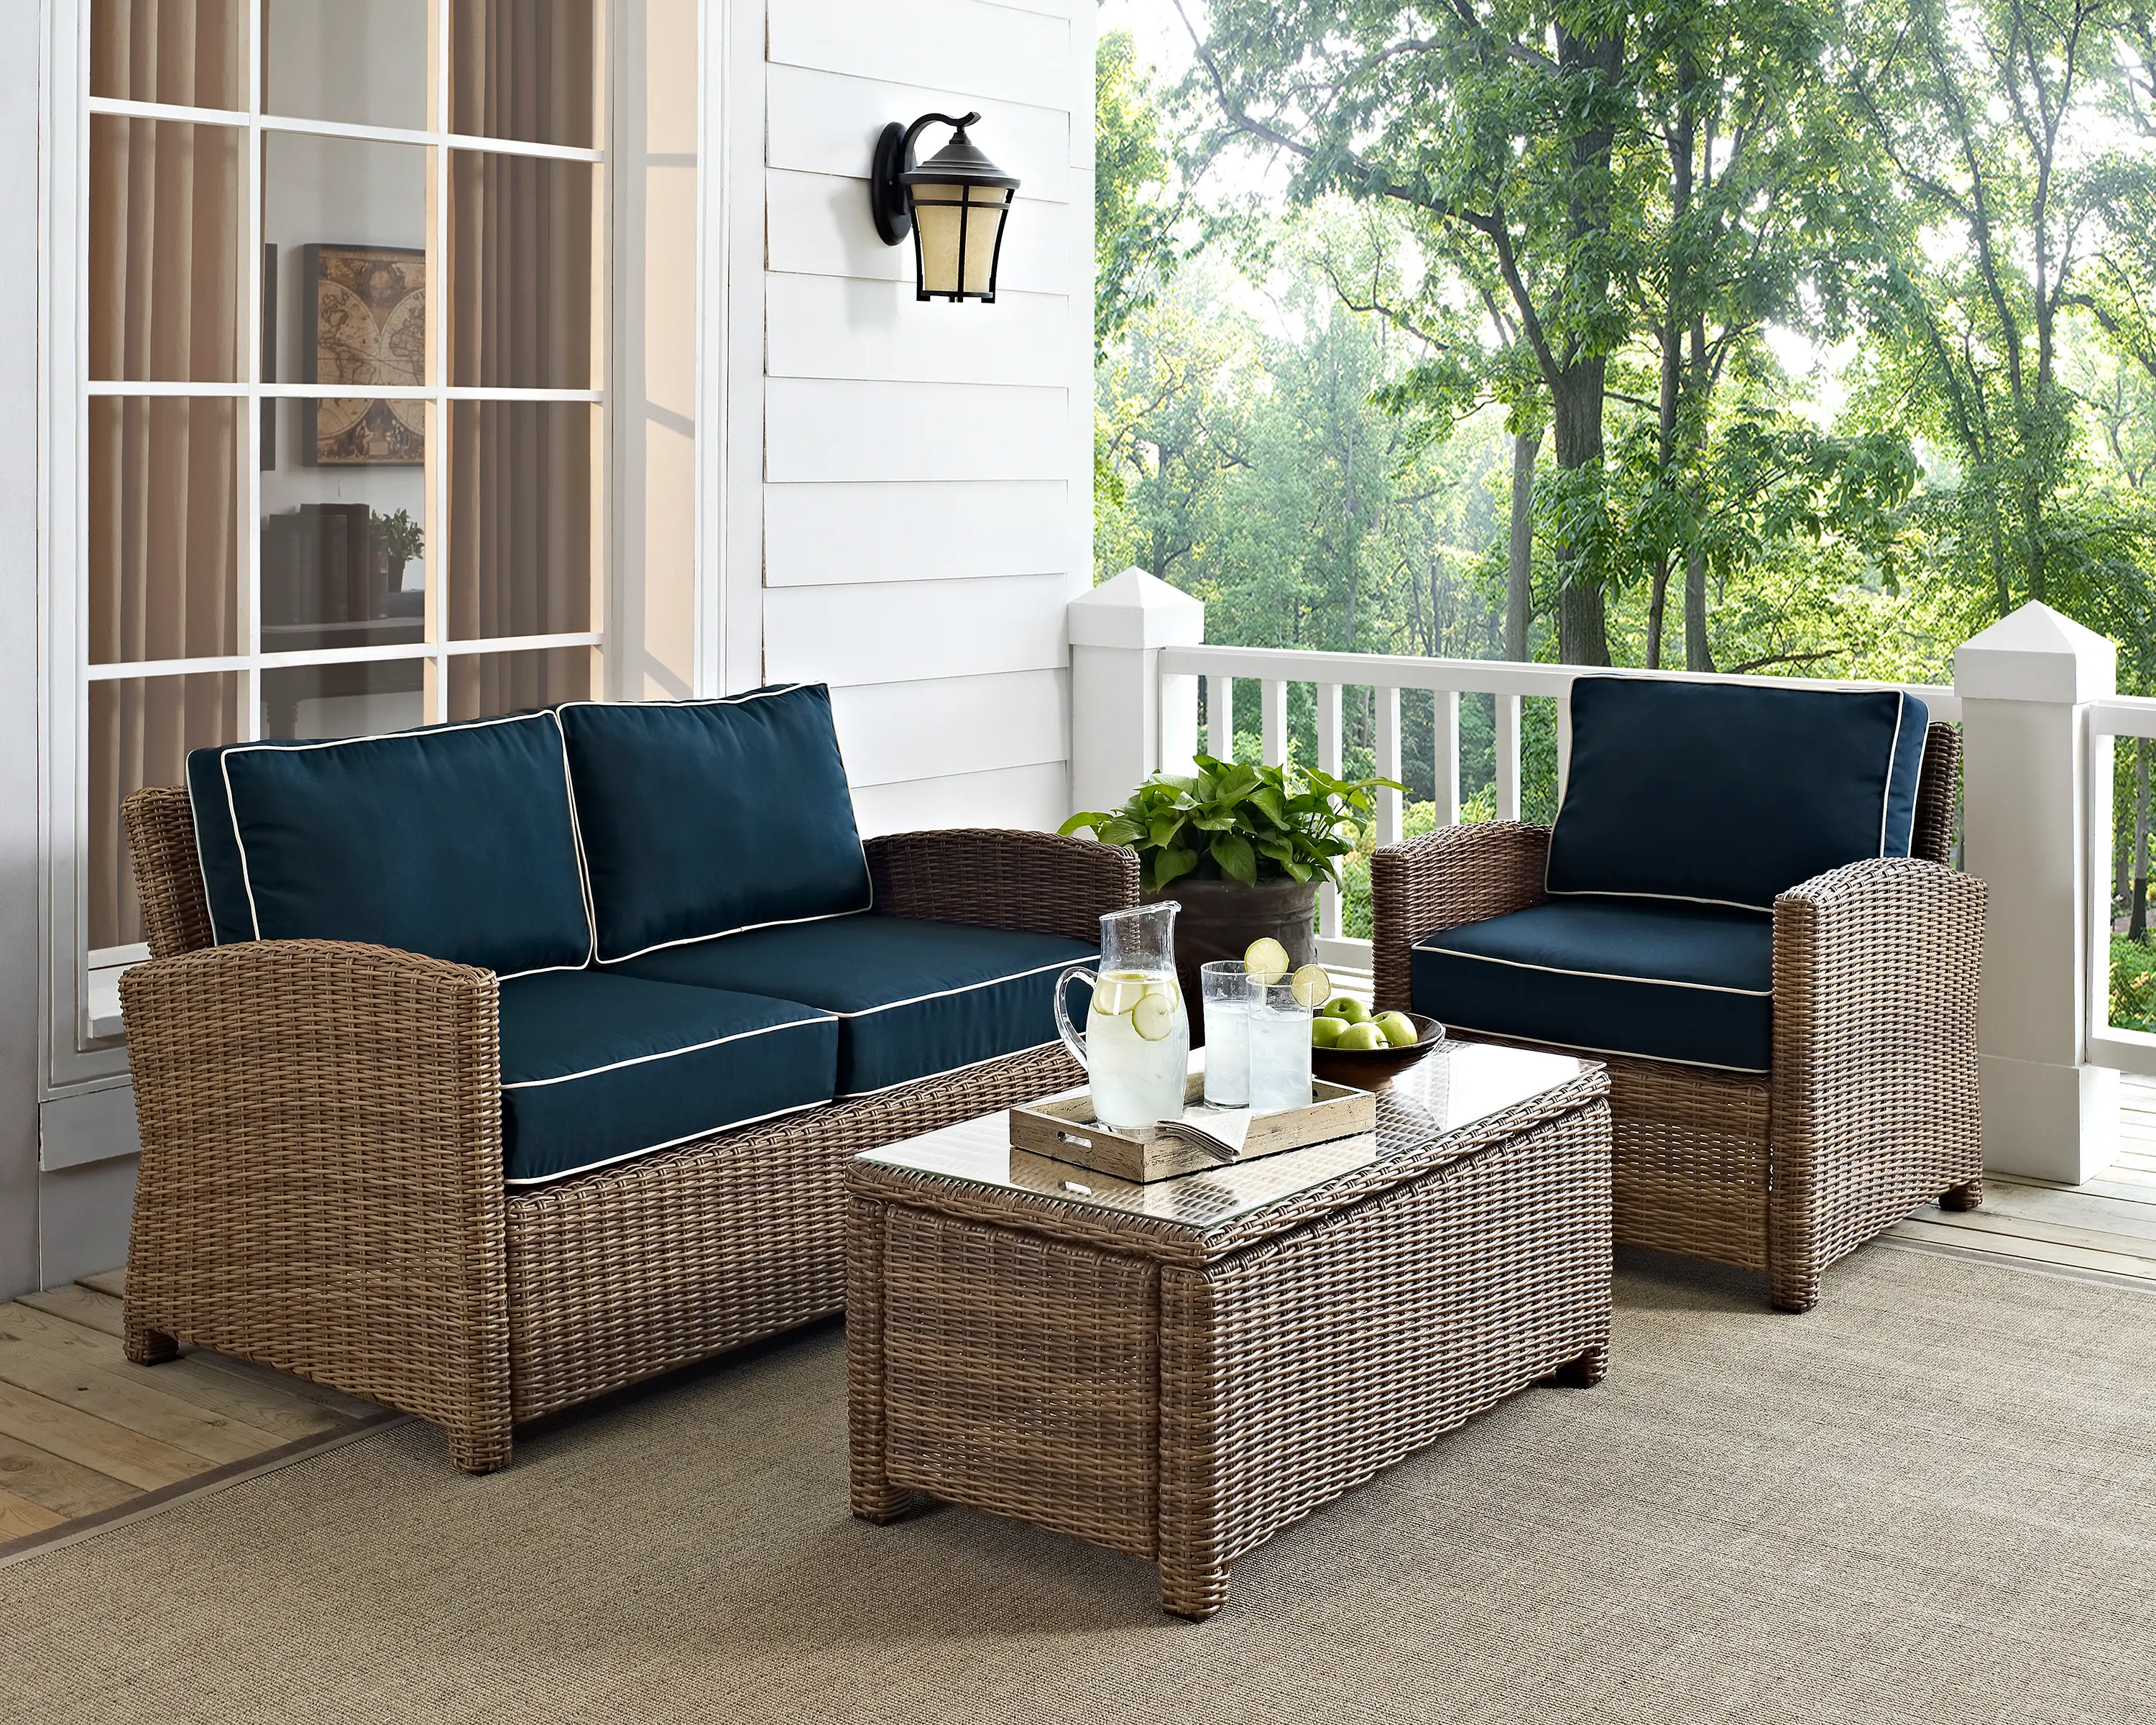 Bradenton Navy and Wicker 3 pc Loveseat, Armchair, and Table Set